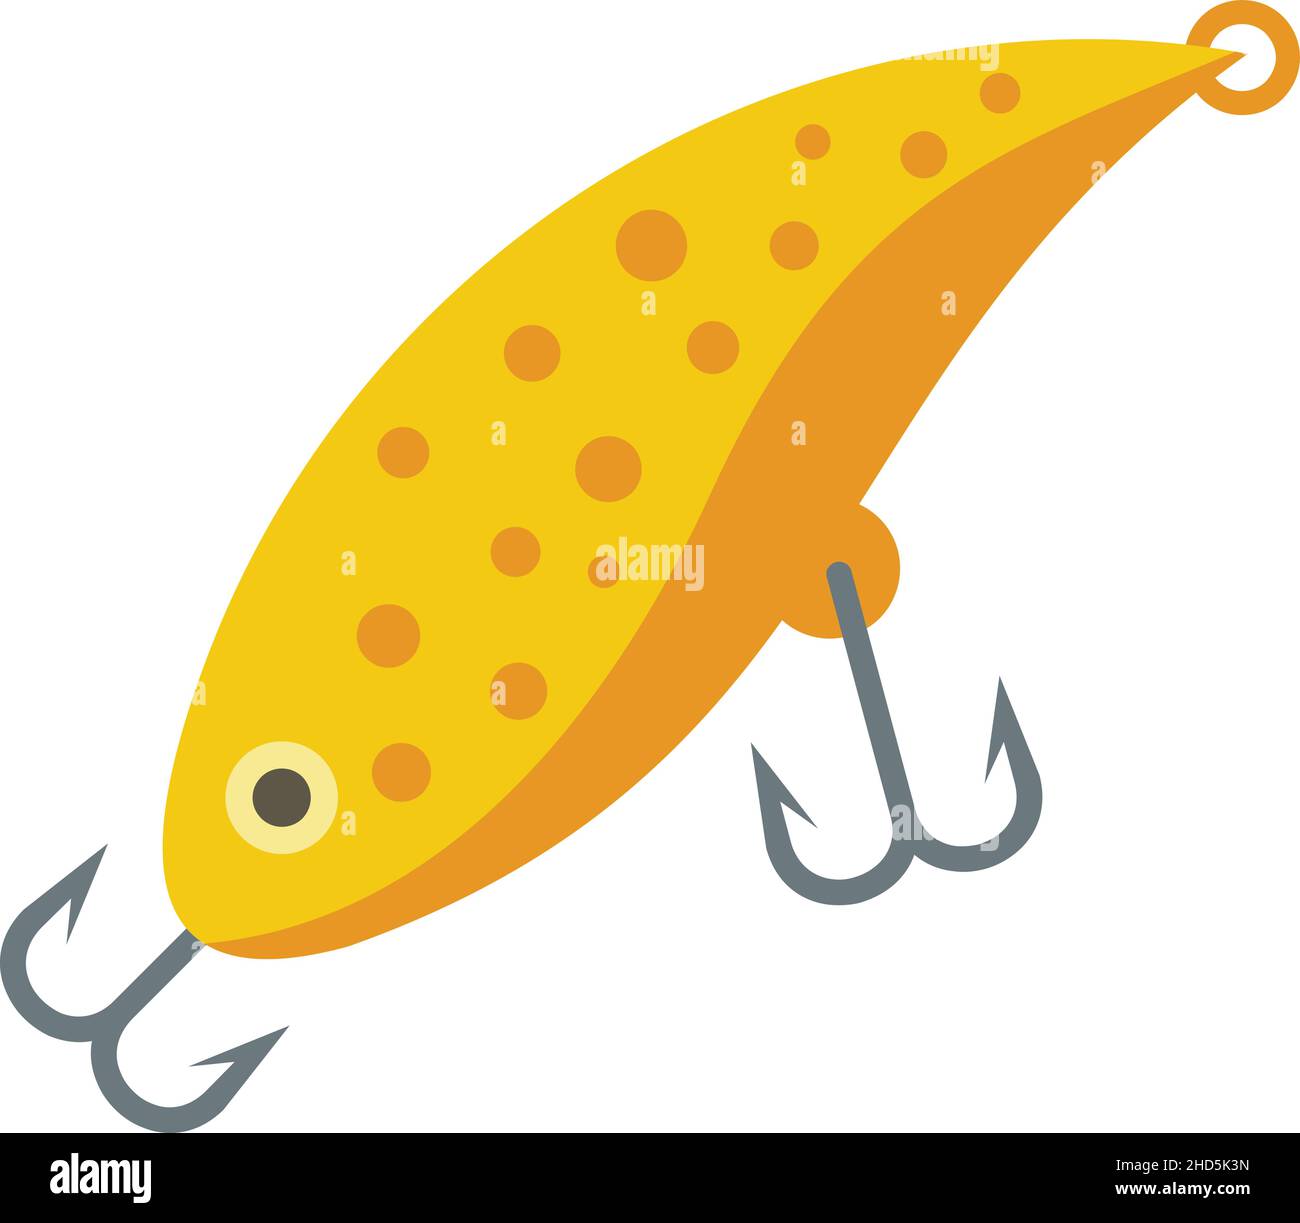 https://c8.alamy.com/comp/2HD5K3N/fish-bait-double-hook-icon-flat-illustration-of-fish-bait-double-hook-vector-icon-isolated-on-white-background-2HD5K3N.jpg